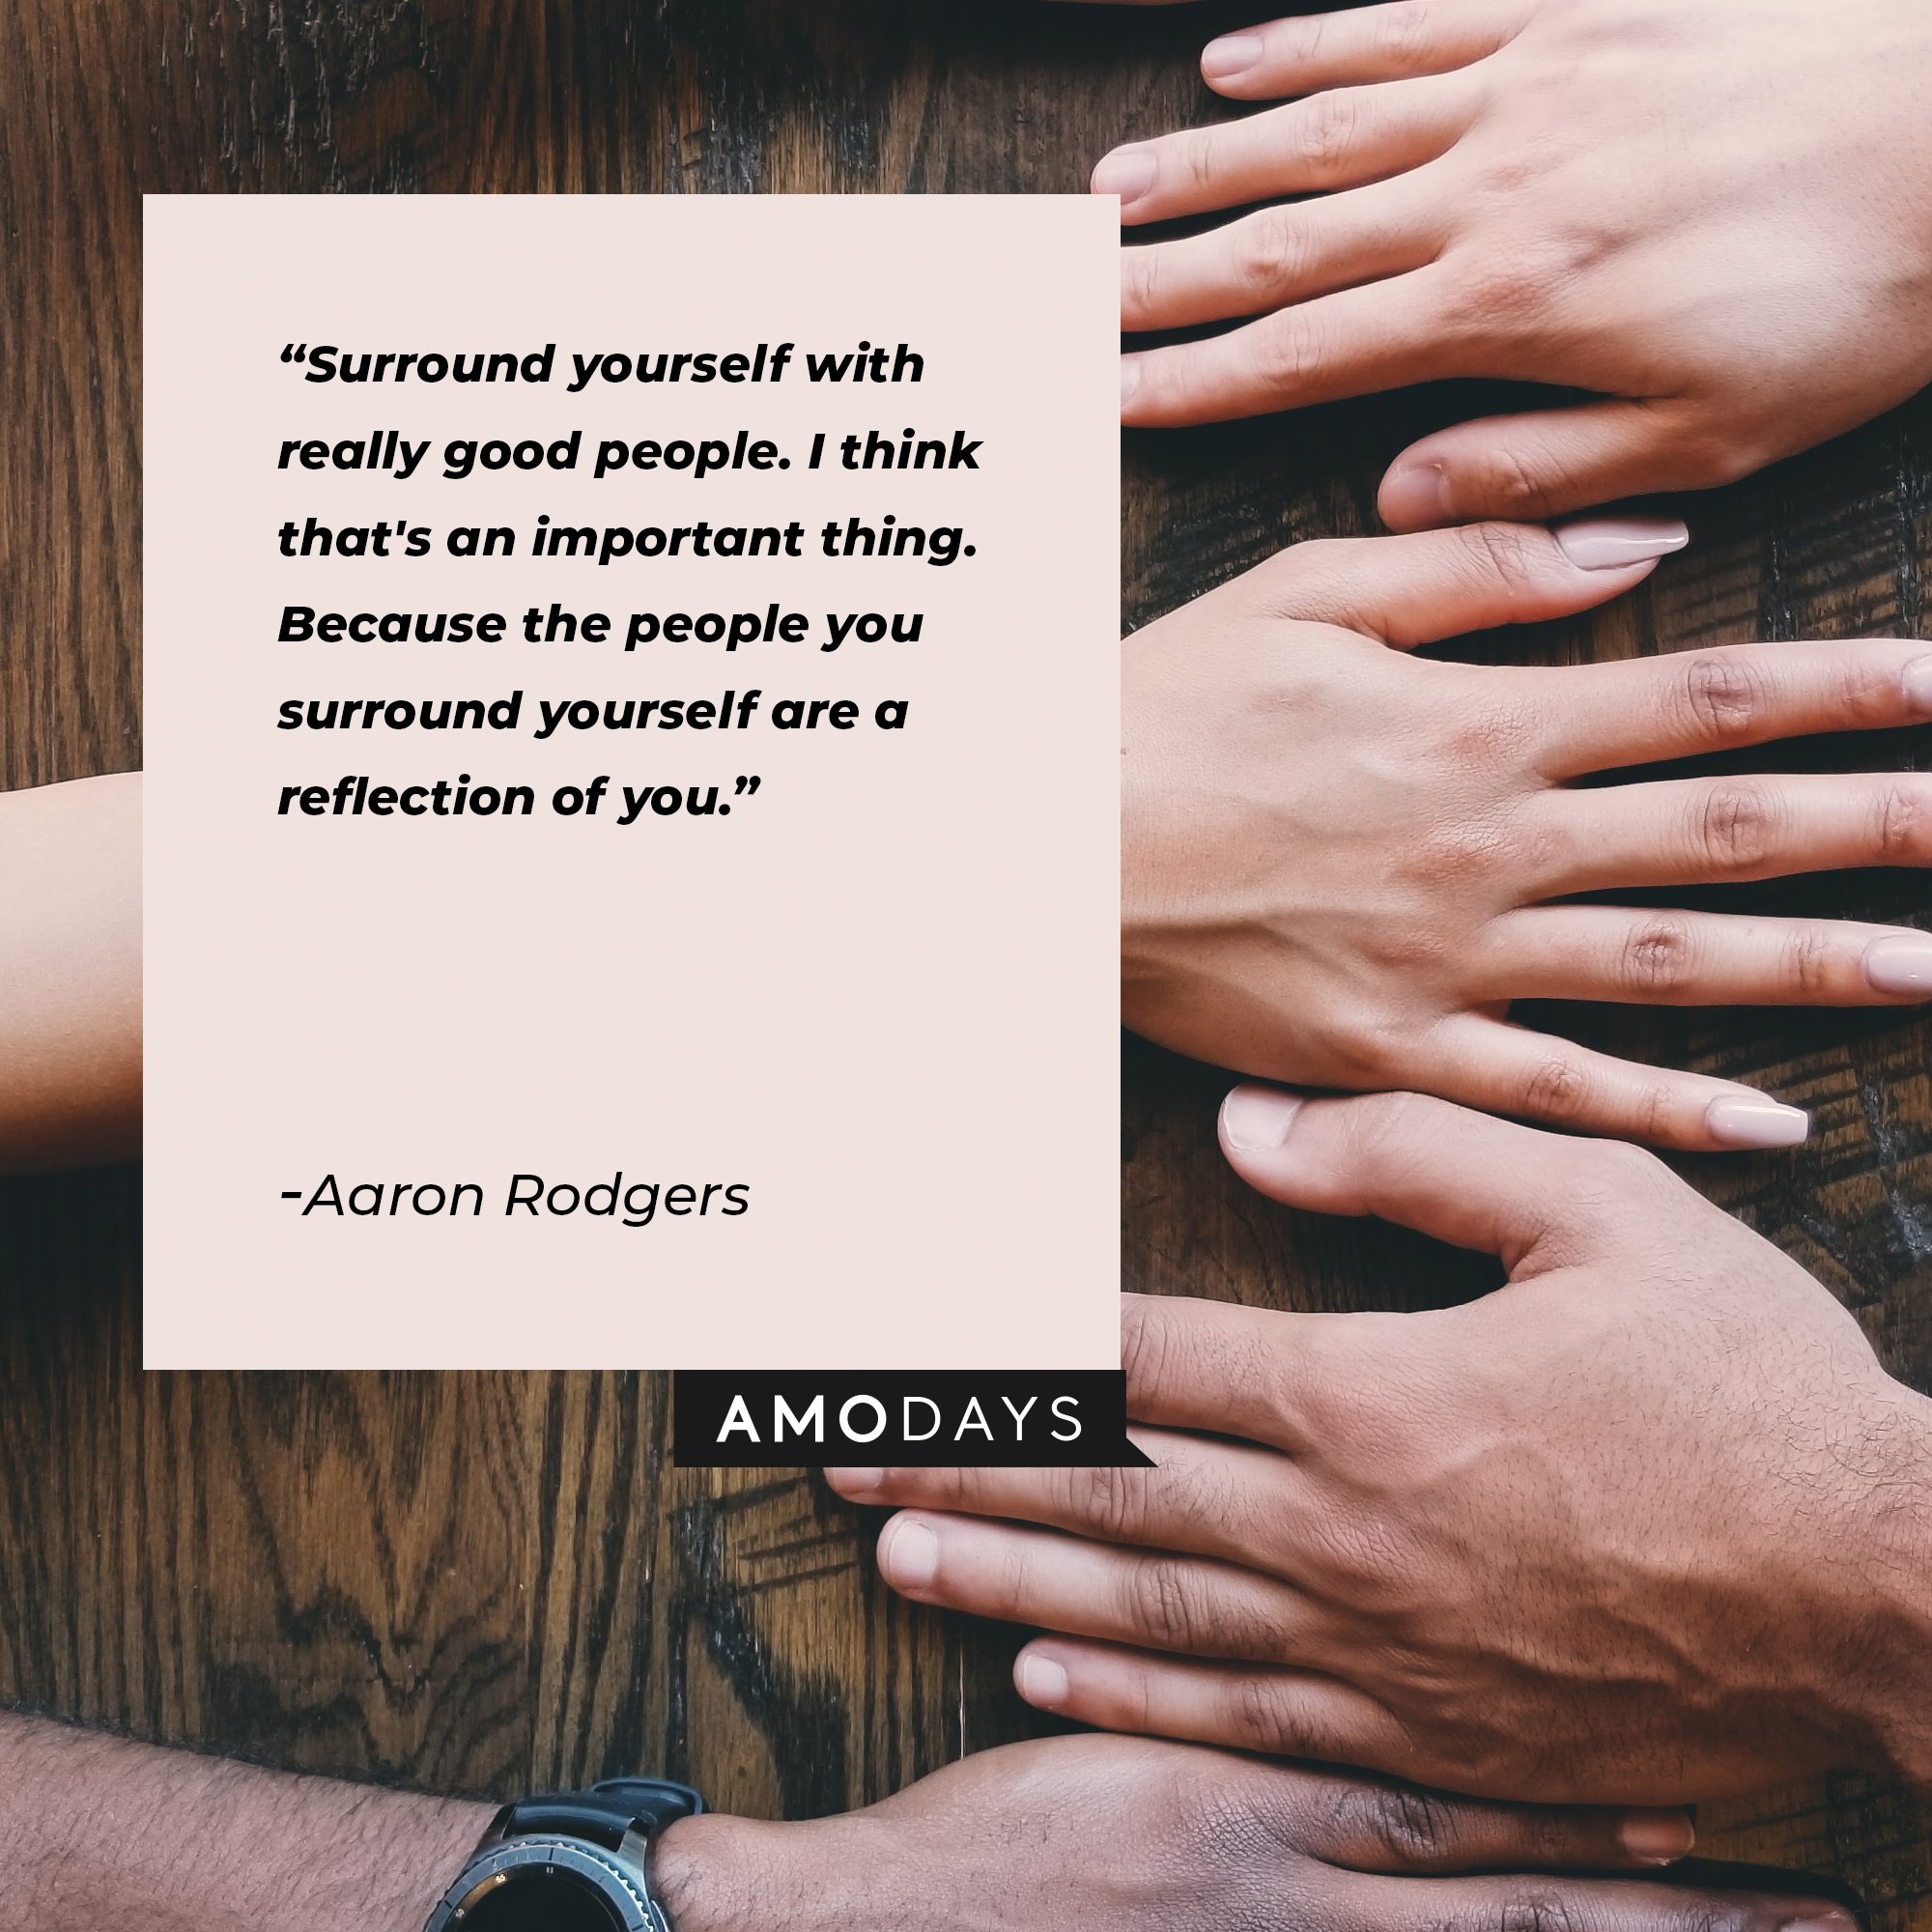 Kid Rock’s quote: "Surround yourself with good people. Whether they're the best or not, people are capable of learning if they've got good hearts and they're good souls." | Image: AmoDays  